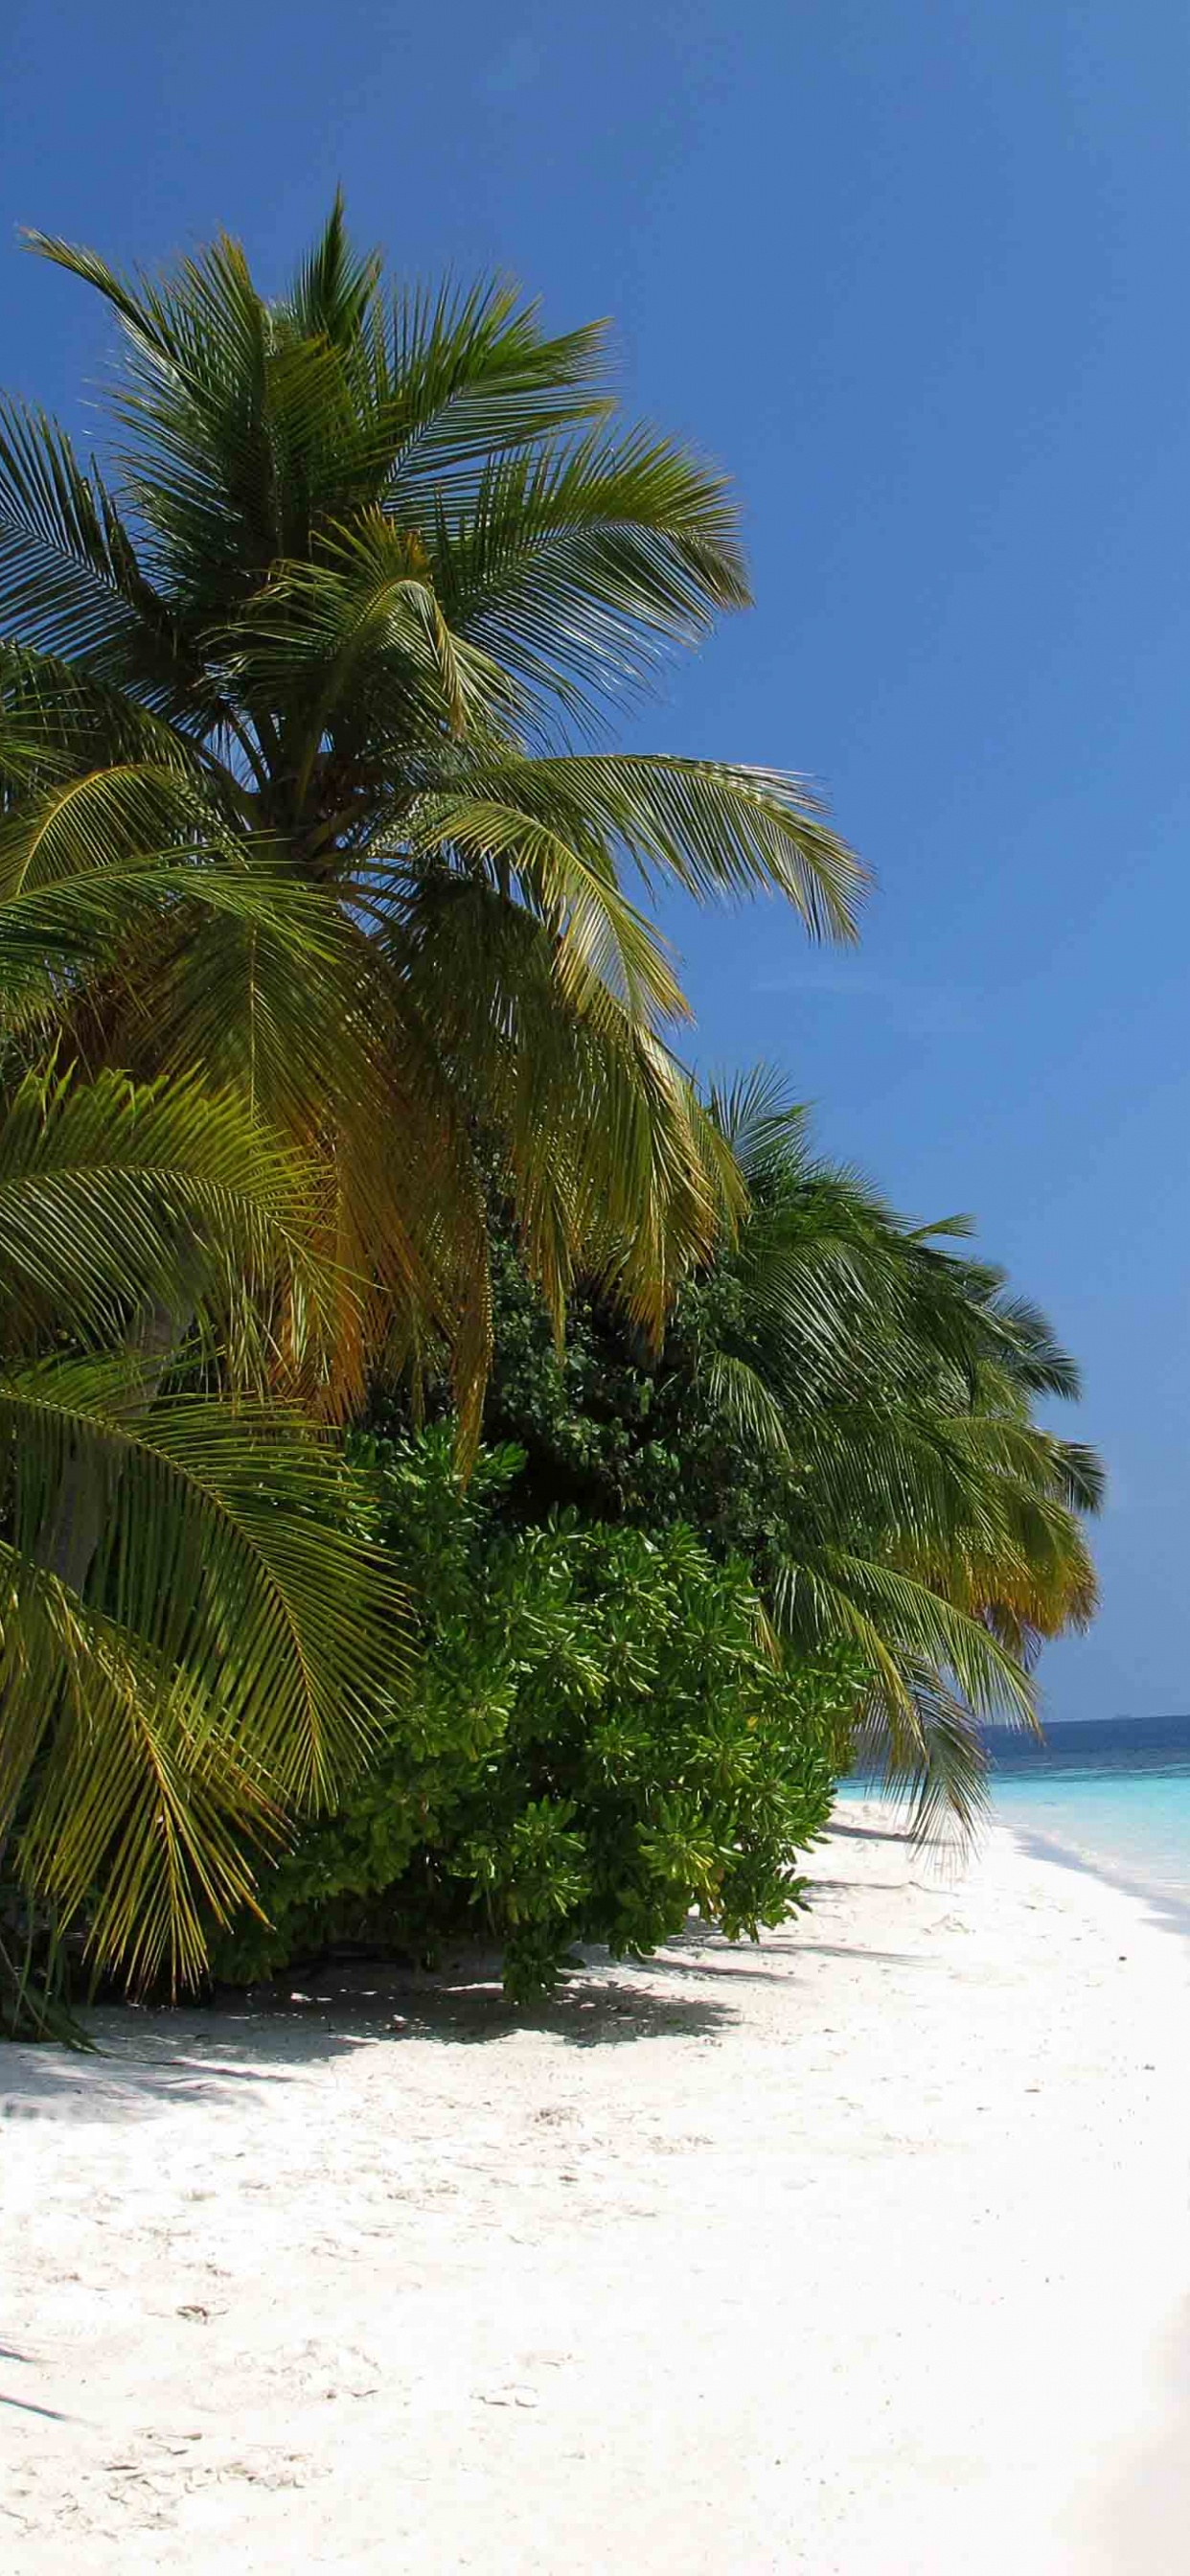 Green Palm Tree on White Sand Beach During Daytime. Wallpaper in 1242x2688 Resolution